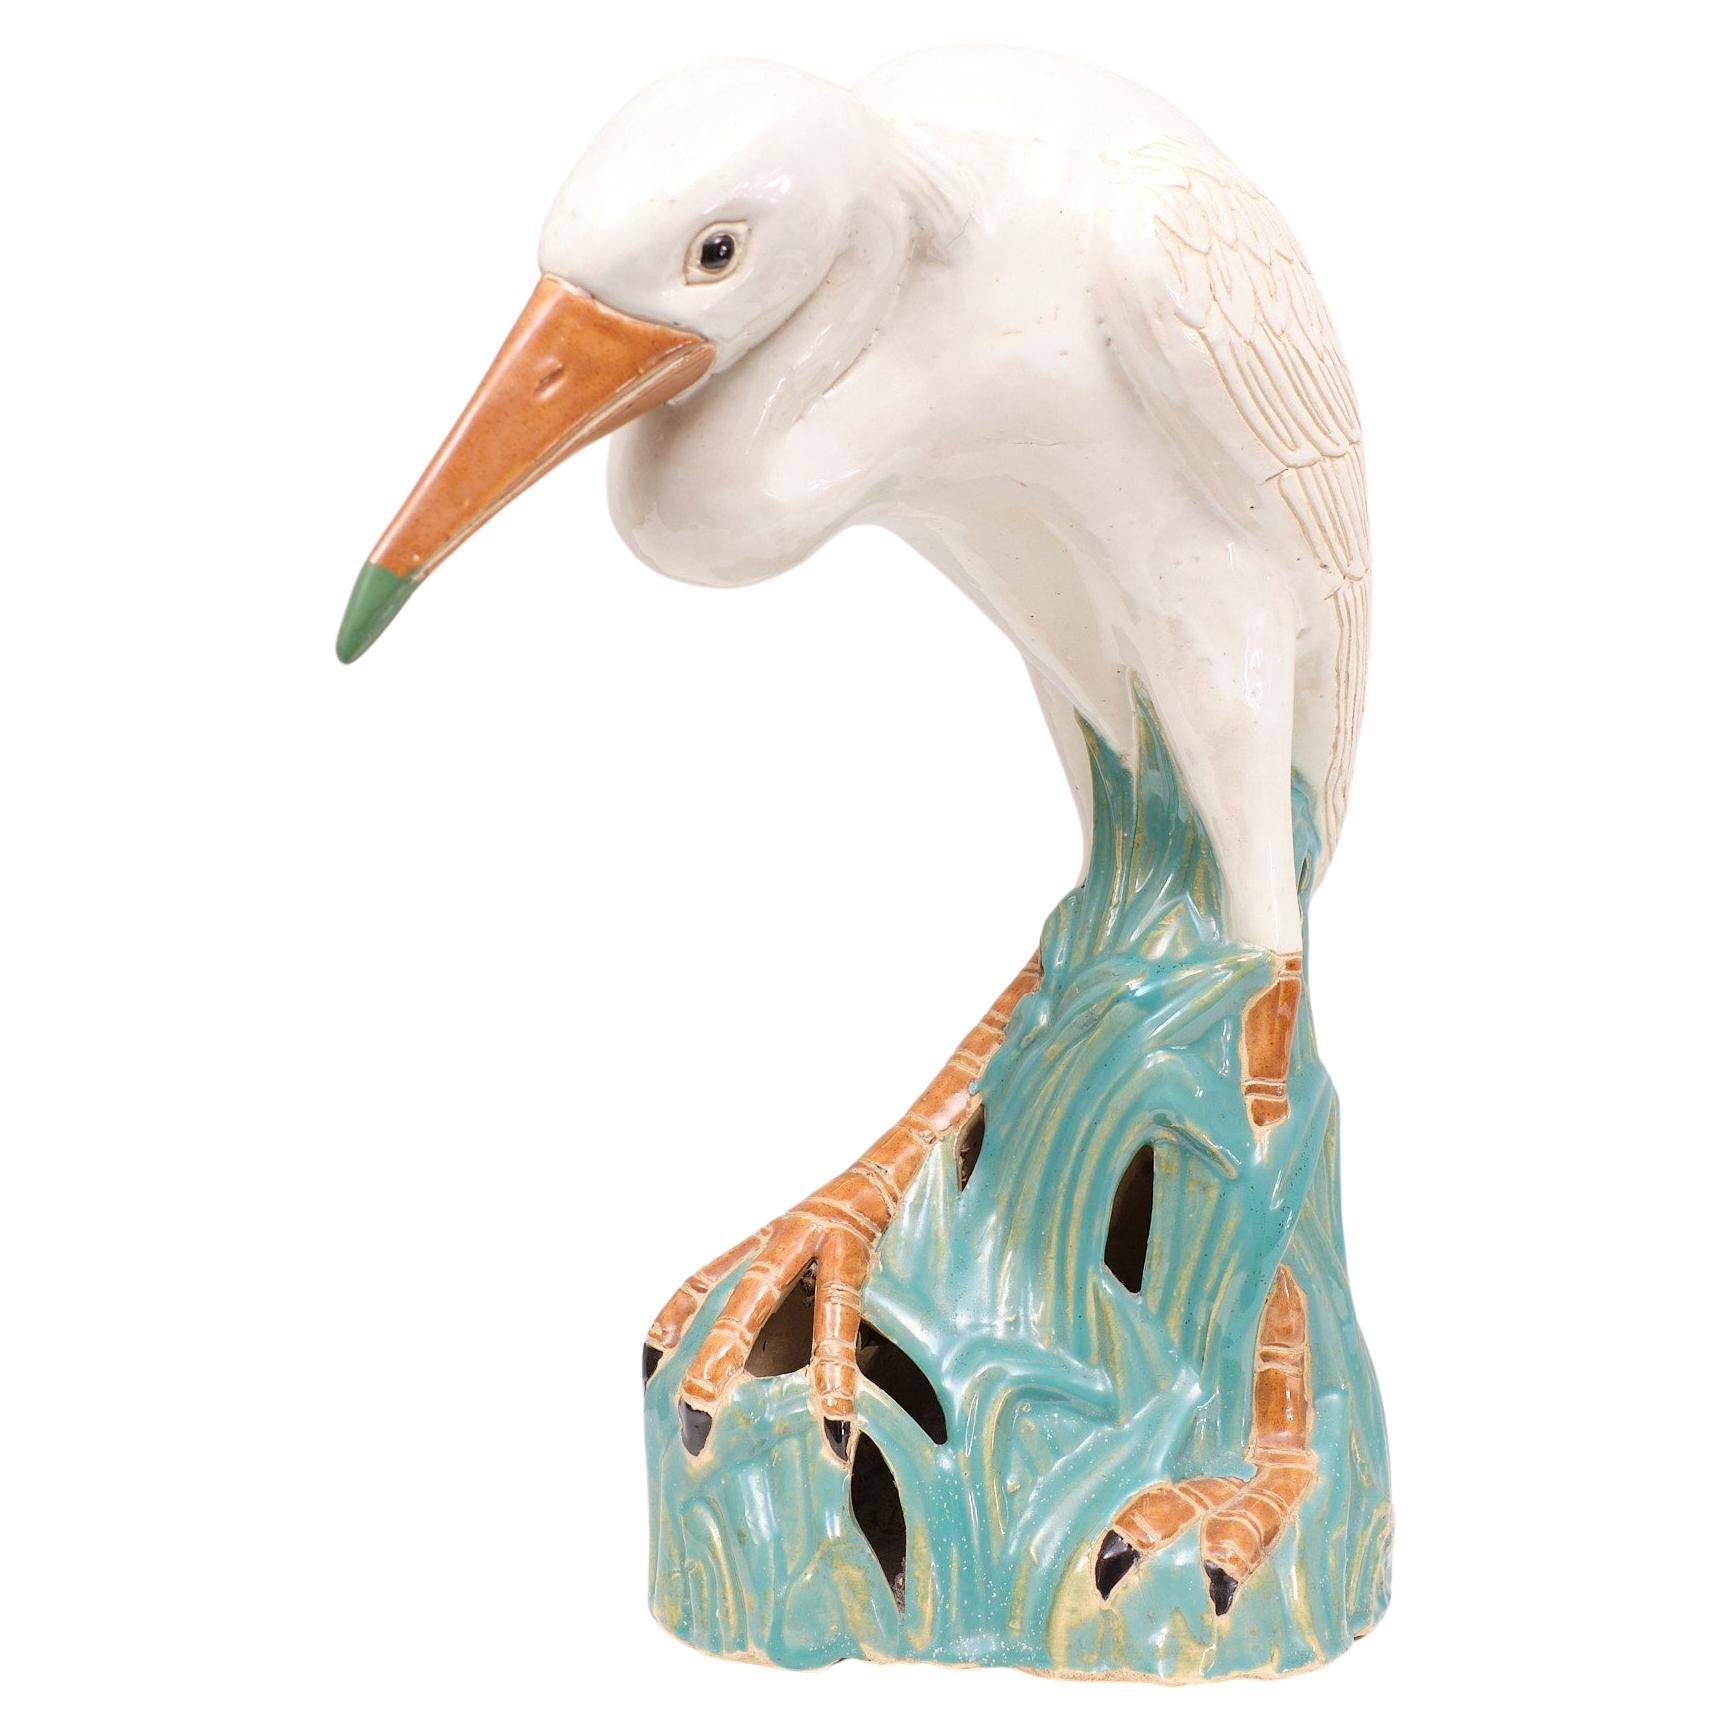 Very nice life size glazed Ceramic  figurine of a Heron .Standing with its feet in the high grass Beautiful Sea Green color . Very good condition . 
.